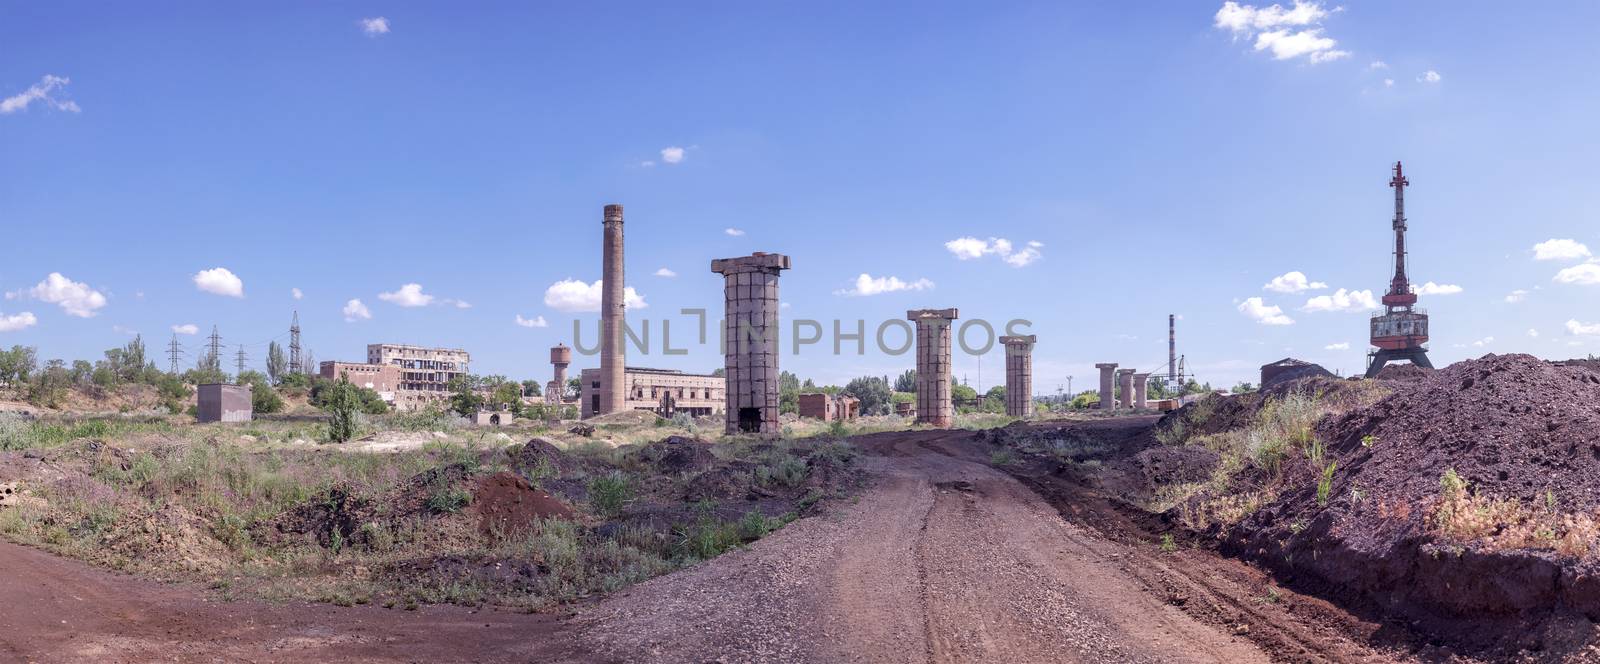 panoramic shot of the old factory ruins against the sky